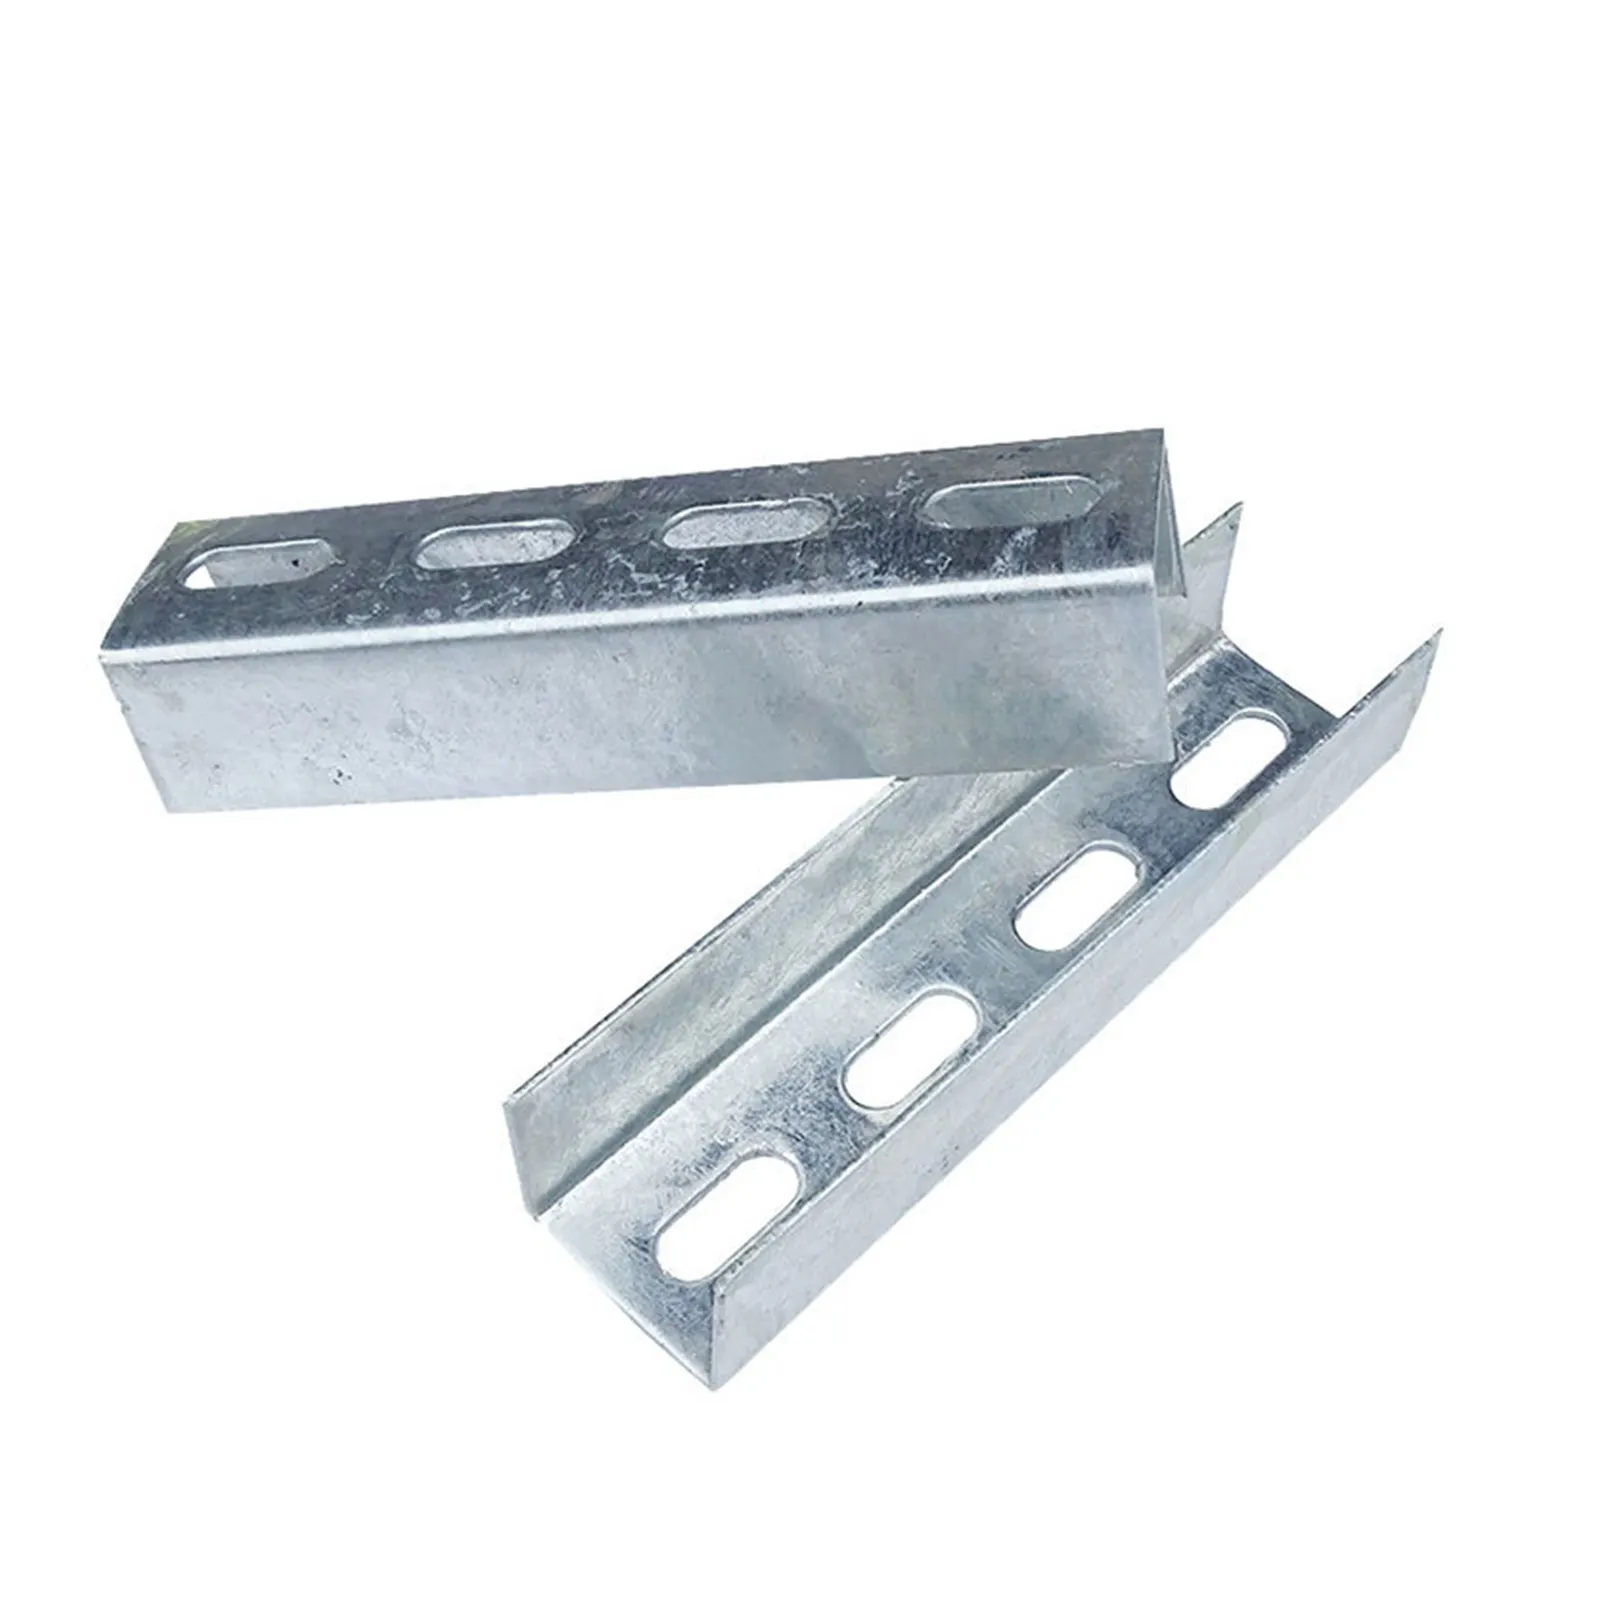 High quality strut channel c channel galvanized steel competitive price galvanized strut channel